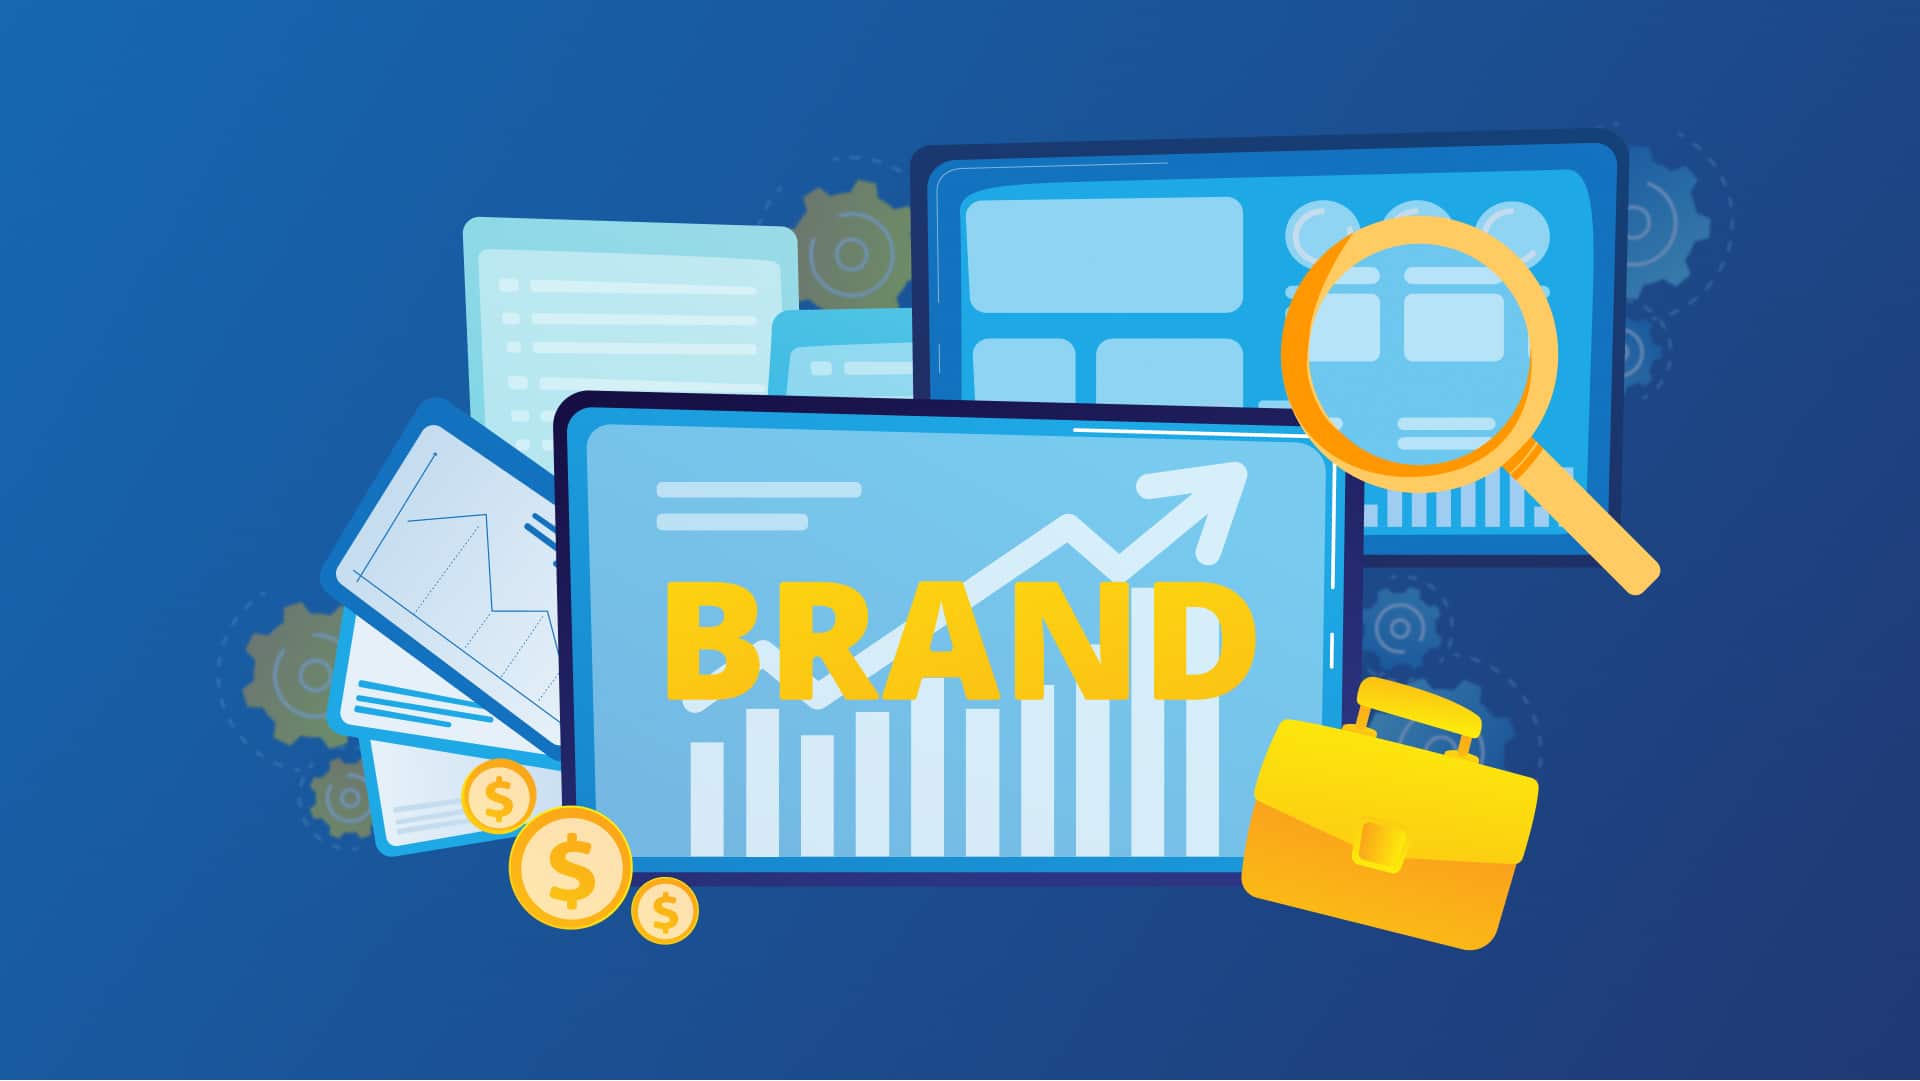 Brand Monitoring Tools: Master Your Online Presence